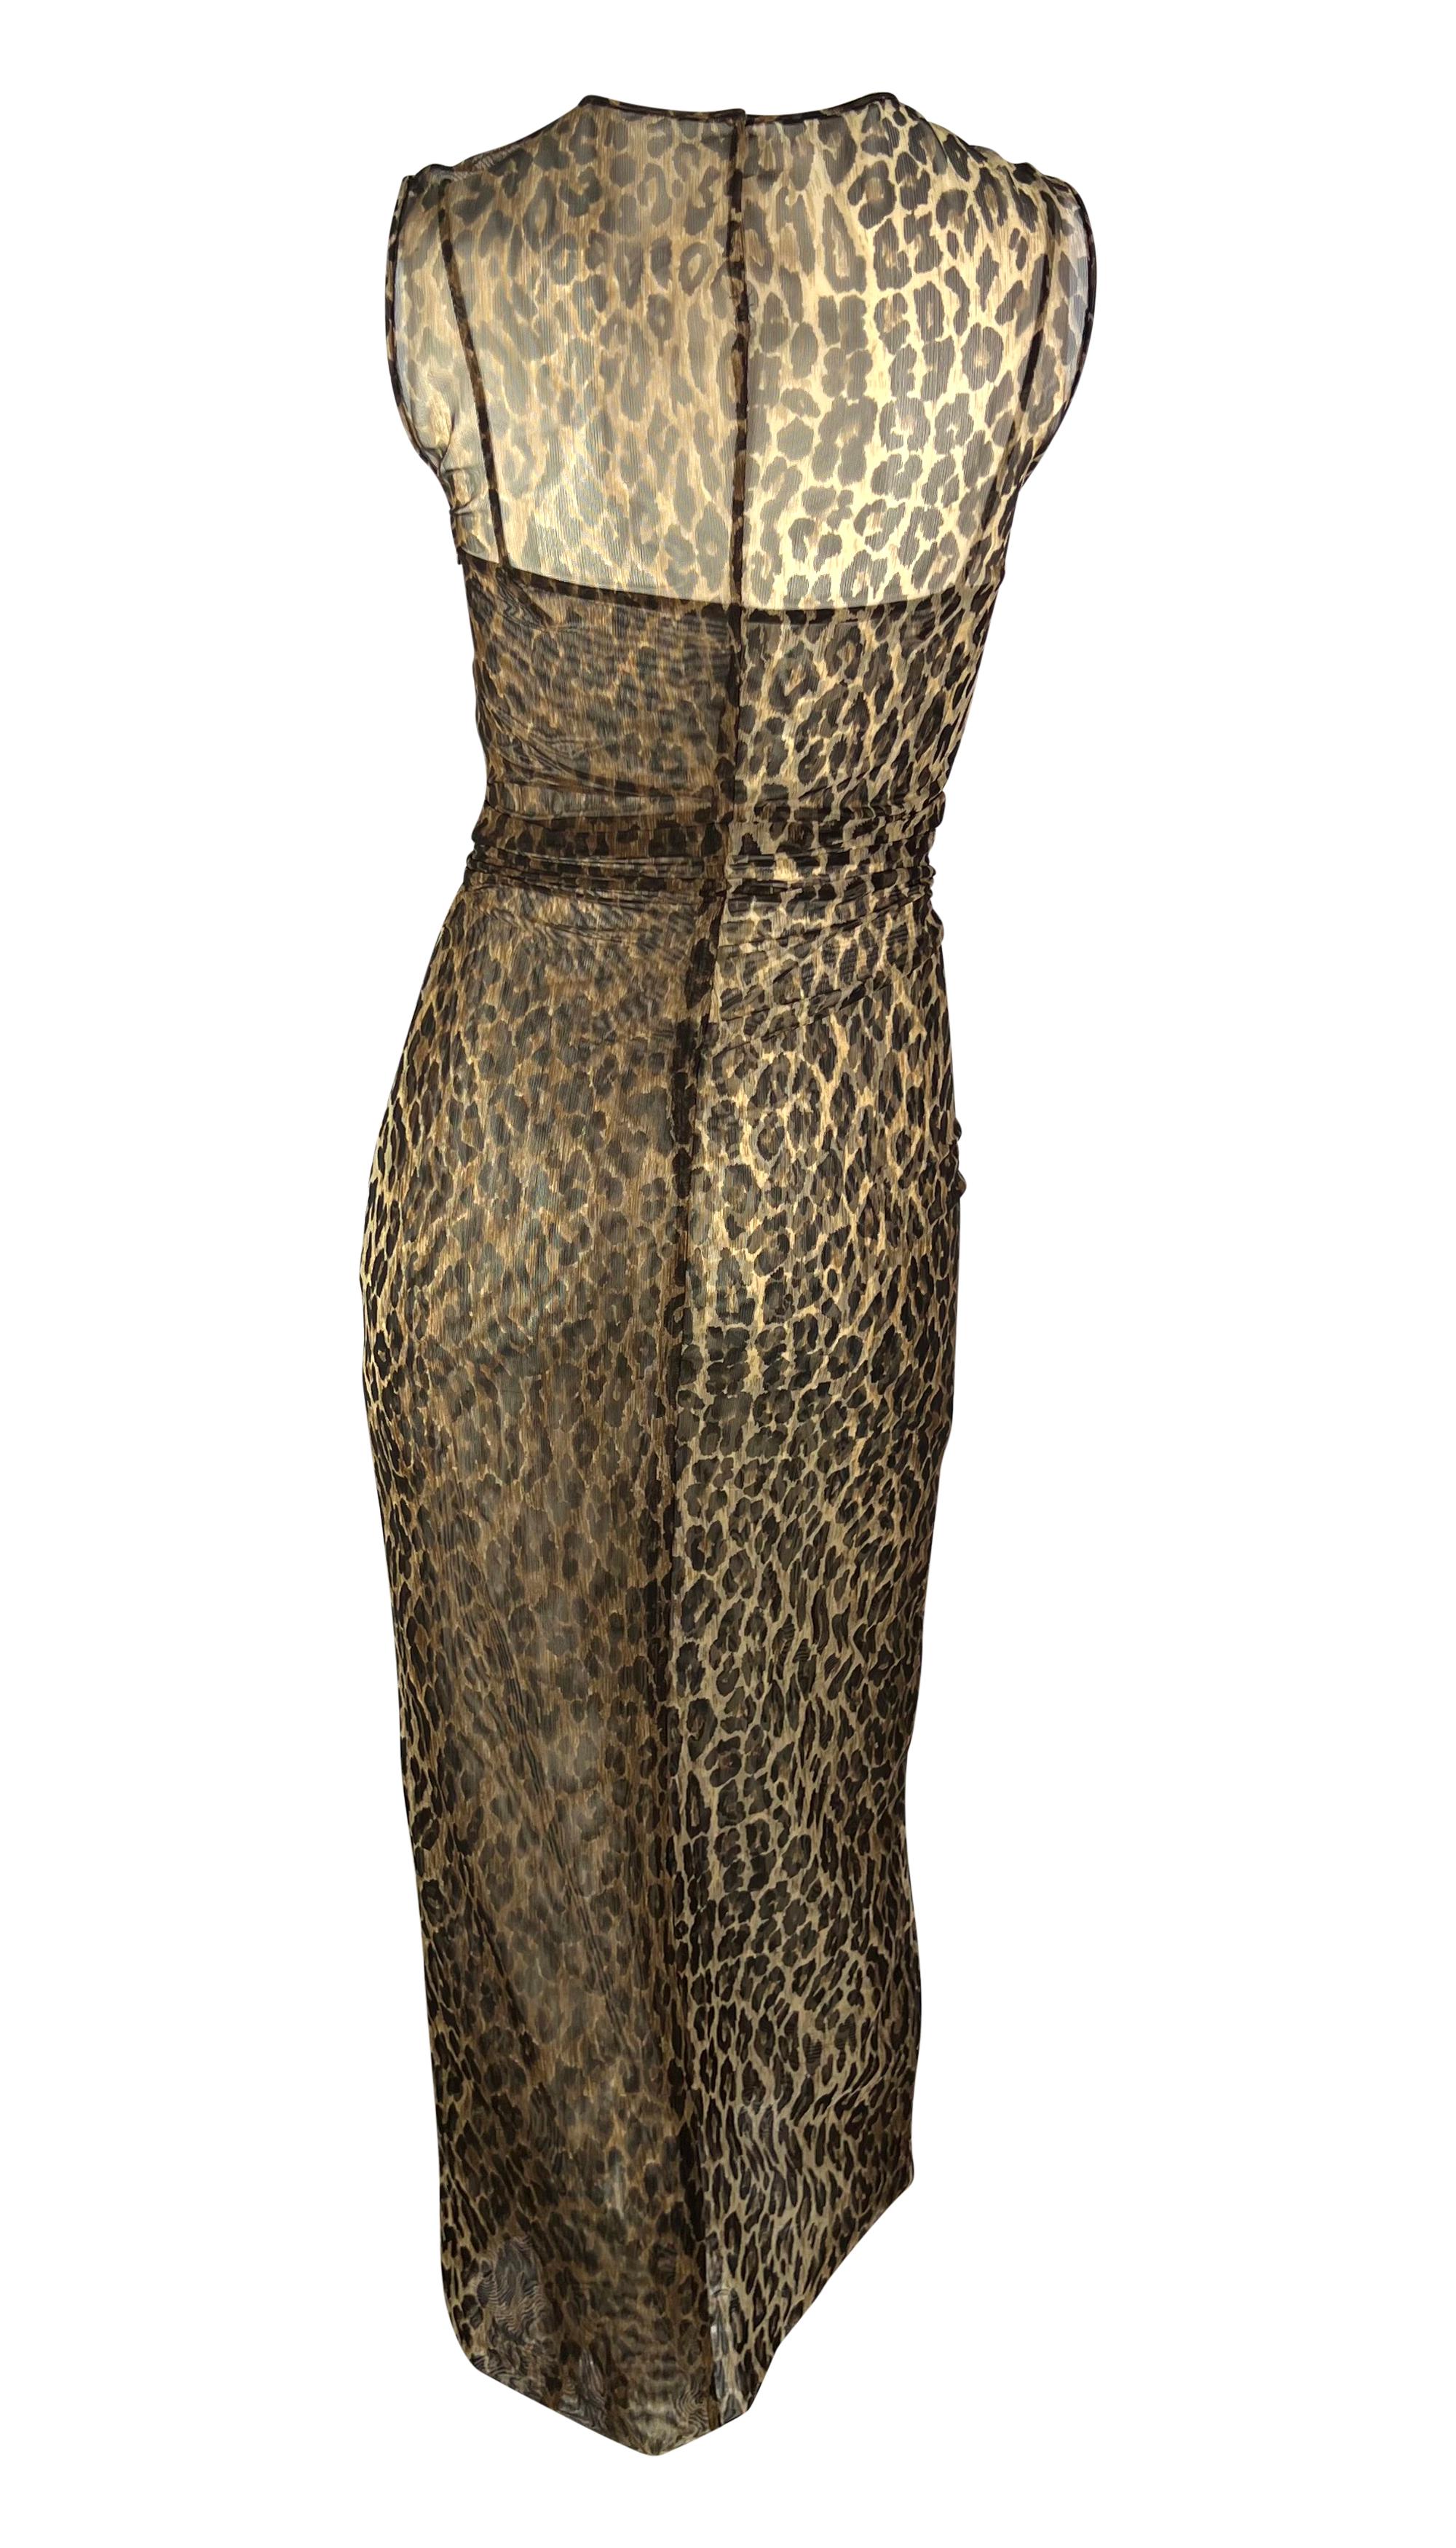 Late 1990s Dolce & Gabbana Sheer Sleeveless Cheetah Print Ruched Bodycon Dress For Sale 1